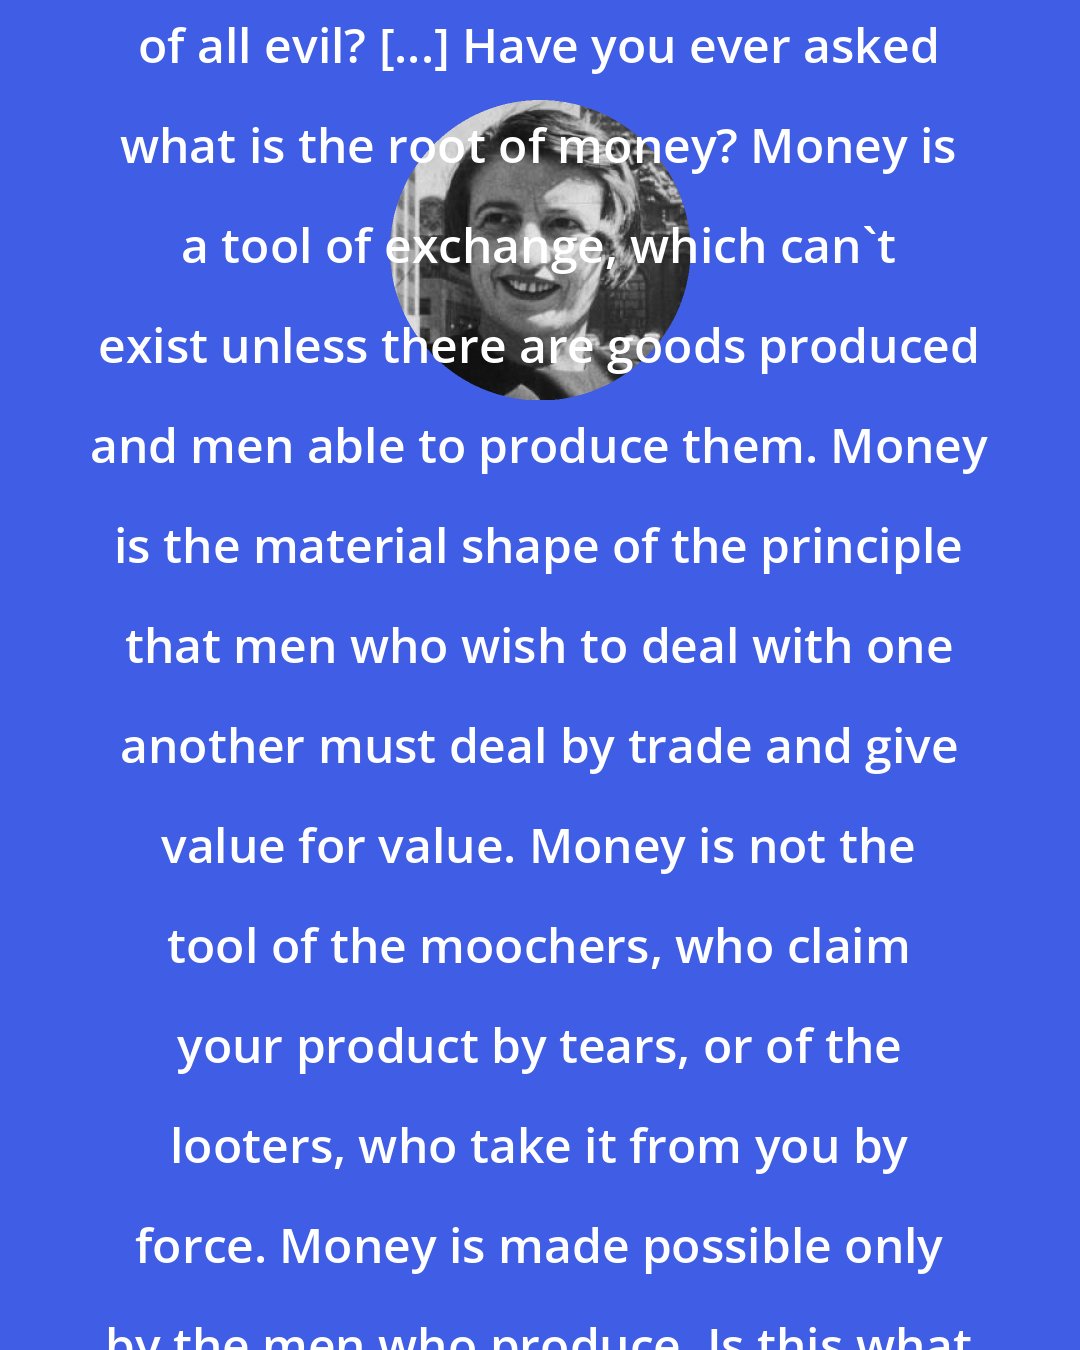 Ayn Rand: So you think that money is the root of all evil? [...] Have you ever asked what is the root of money? Money is a tool of exchange, which can't exist unless there are goods produced and men able to produce them. Money is the material shape of the principle that men who wish to deal with one another must deal by trade and give value for value. Money is not the tool of the moochers, who claim your product by tears, or of the looters, who take it from you by force. Money is made possible only by the men who produce. Is this what you consider evil?